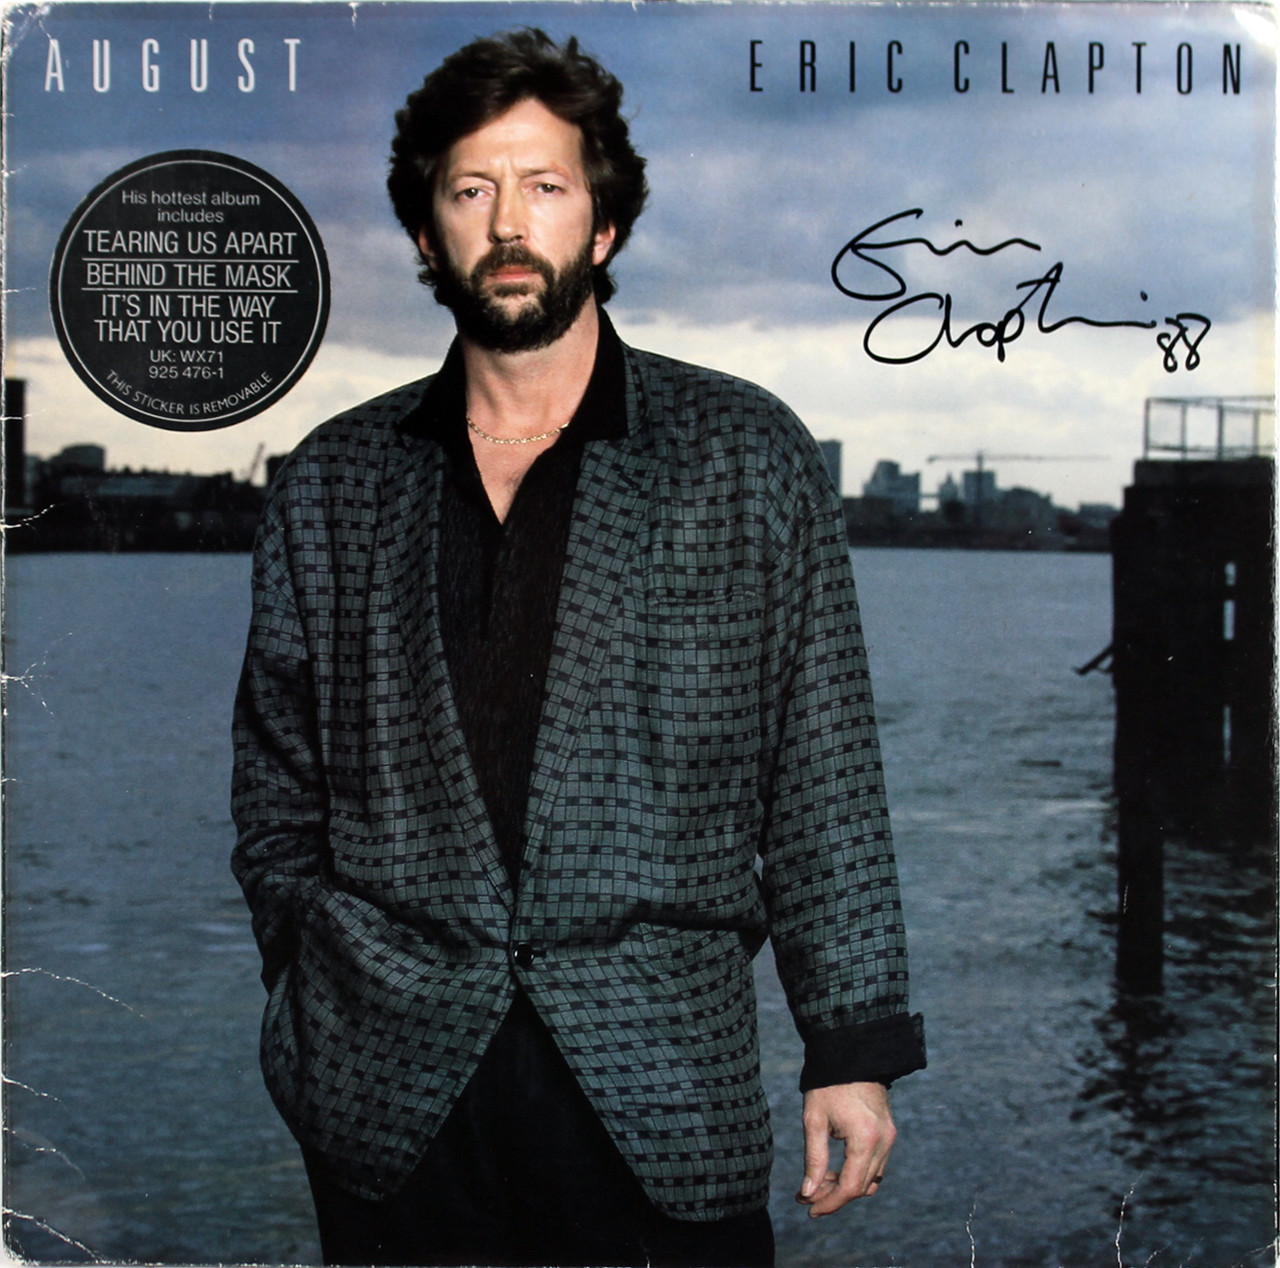 Eric Clapton "88" Authentic Signed August Album Cover W/ Vinyl REAL LOA